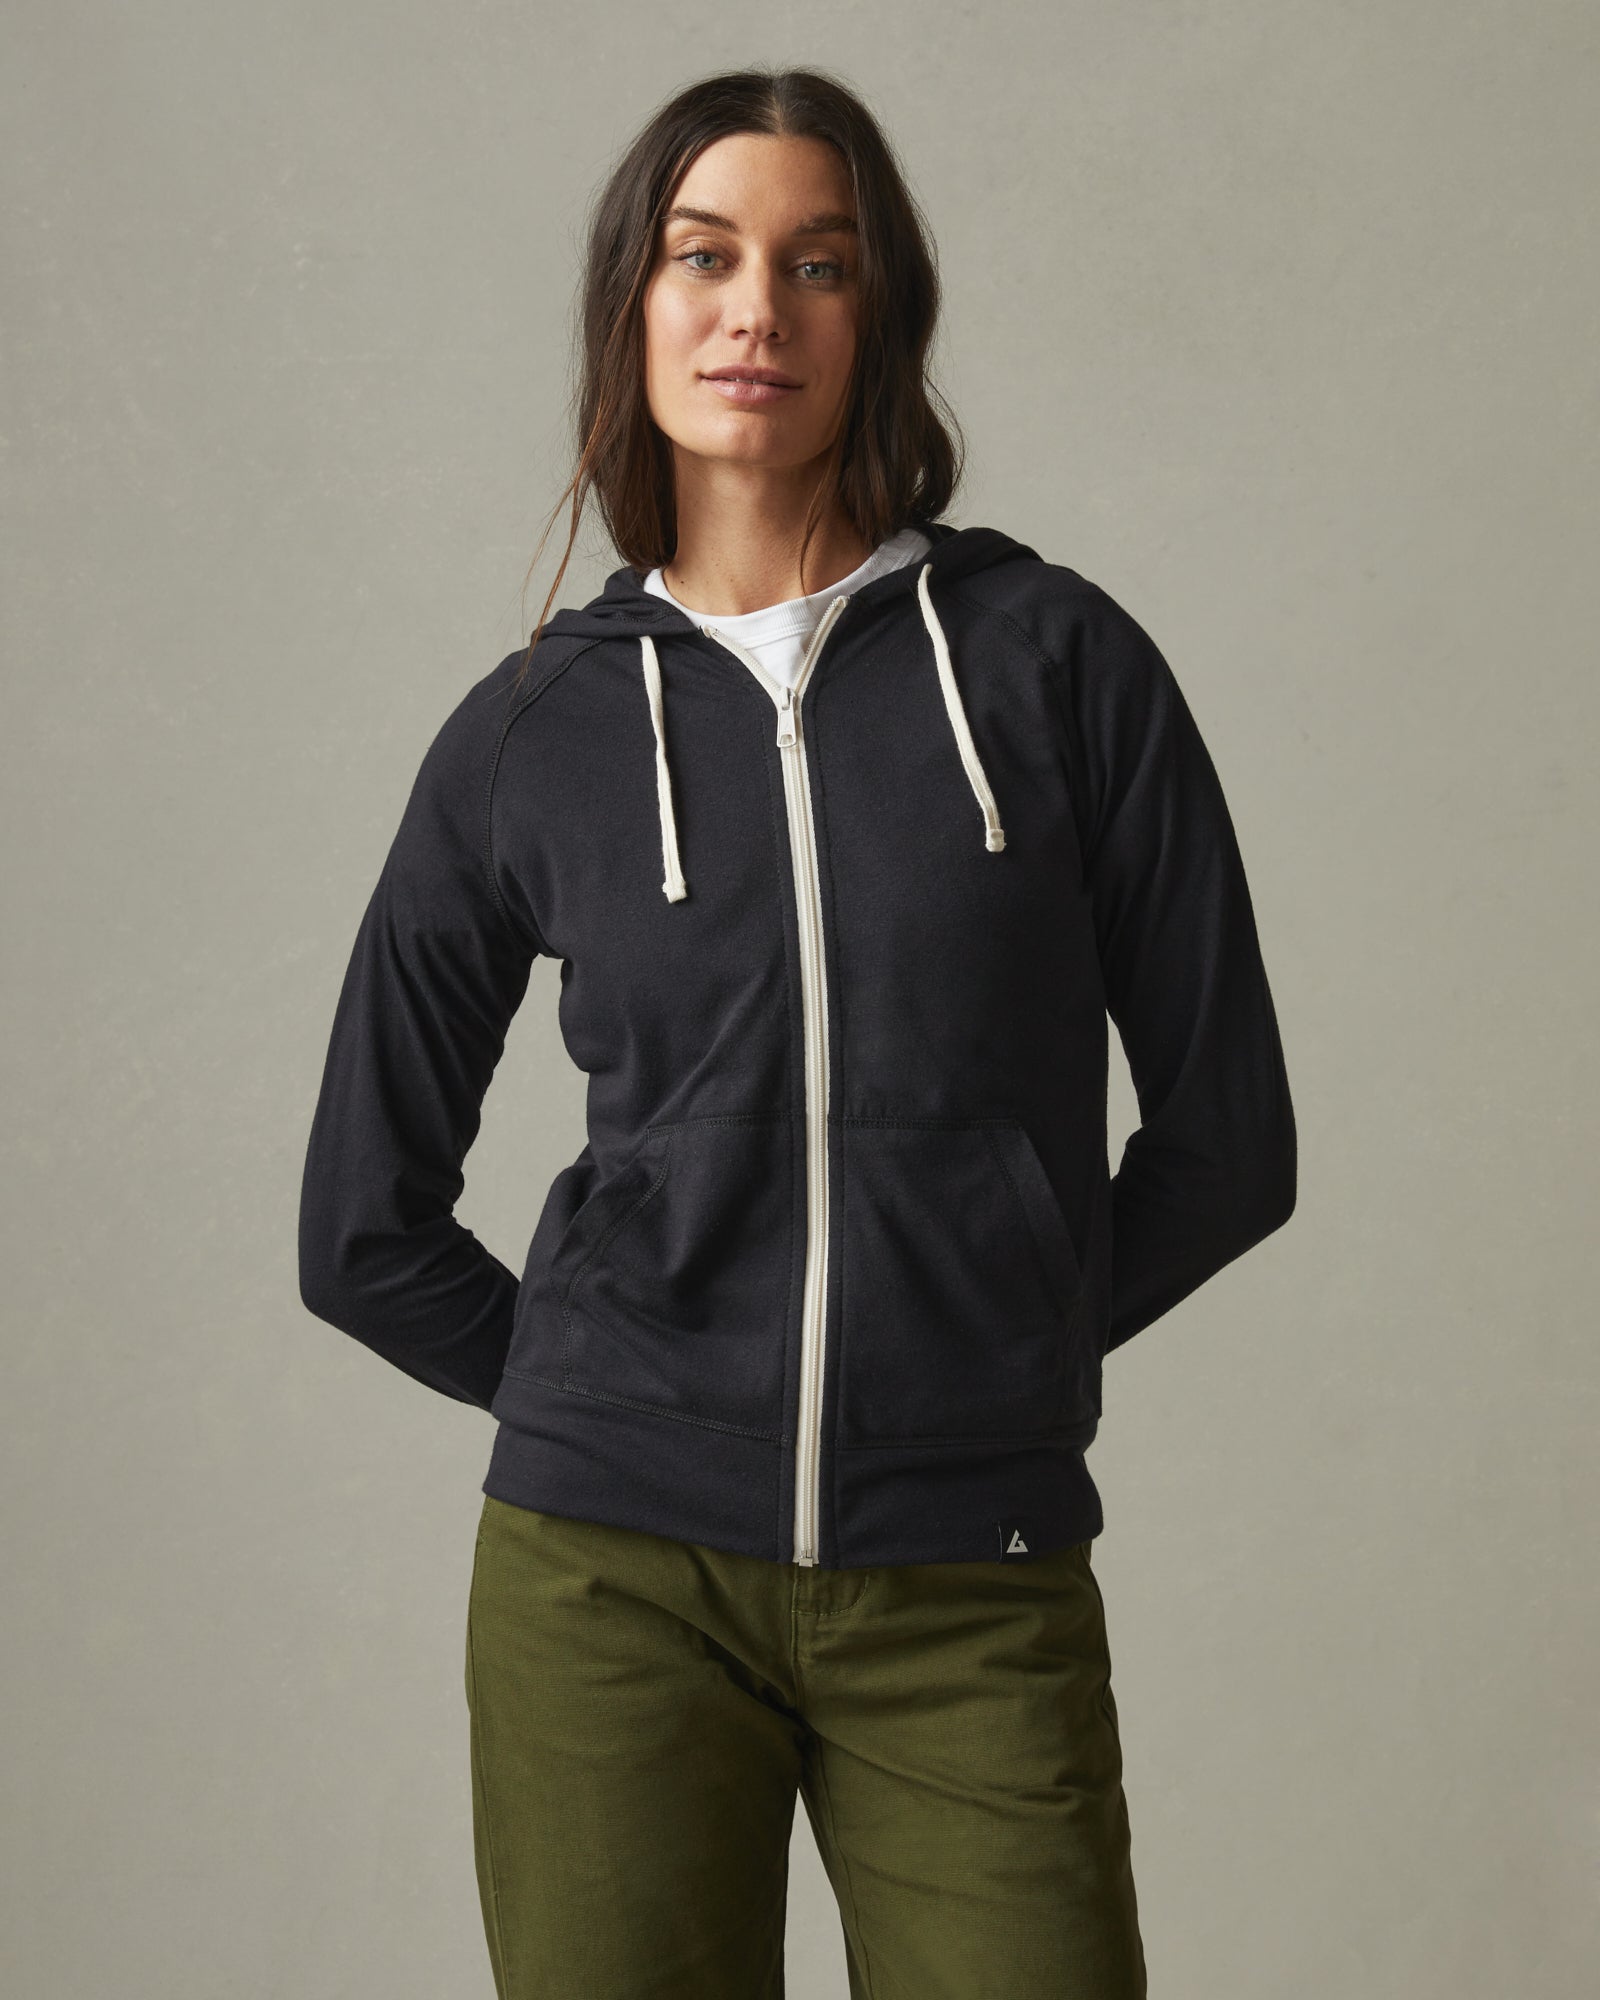 I'm in love with the Scuba Oversized 1/2 Zip Hoodies! Wearing